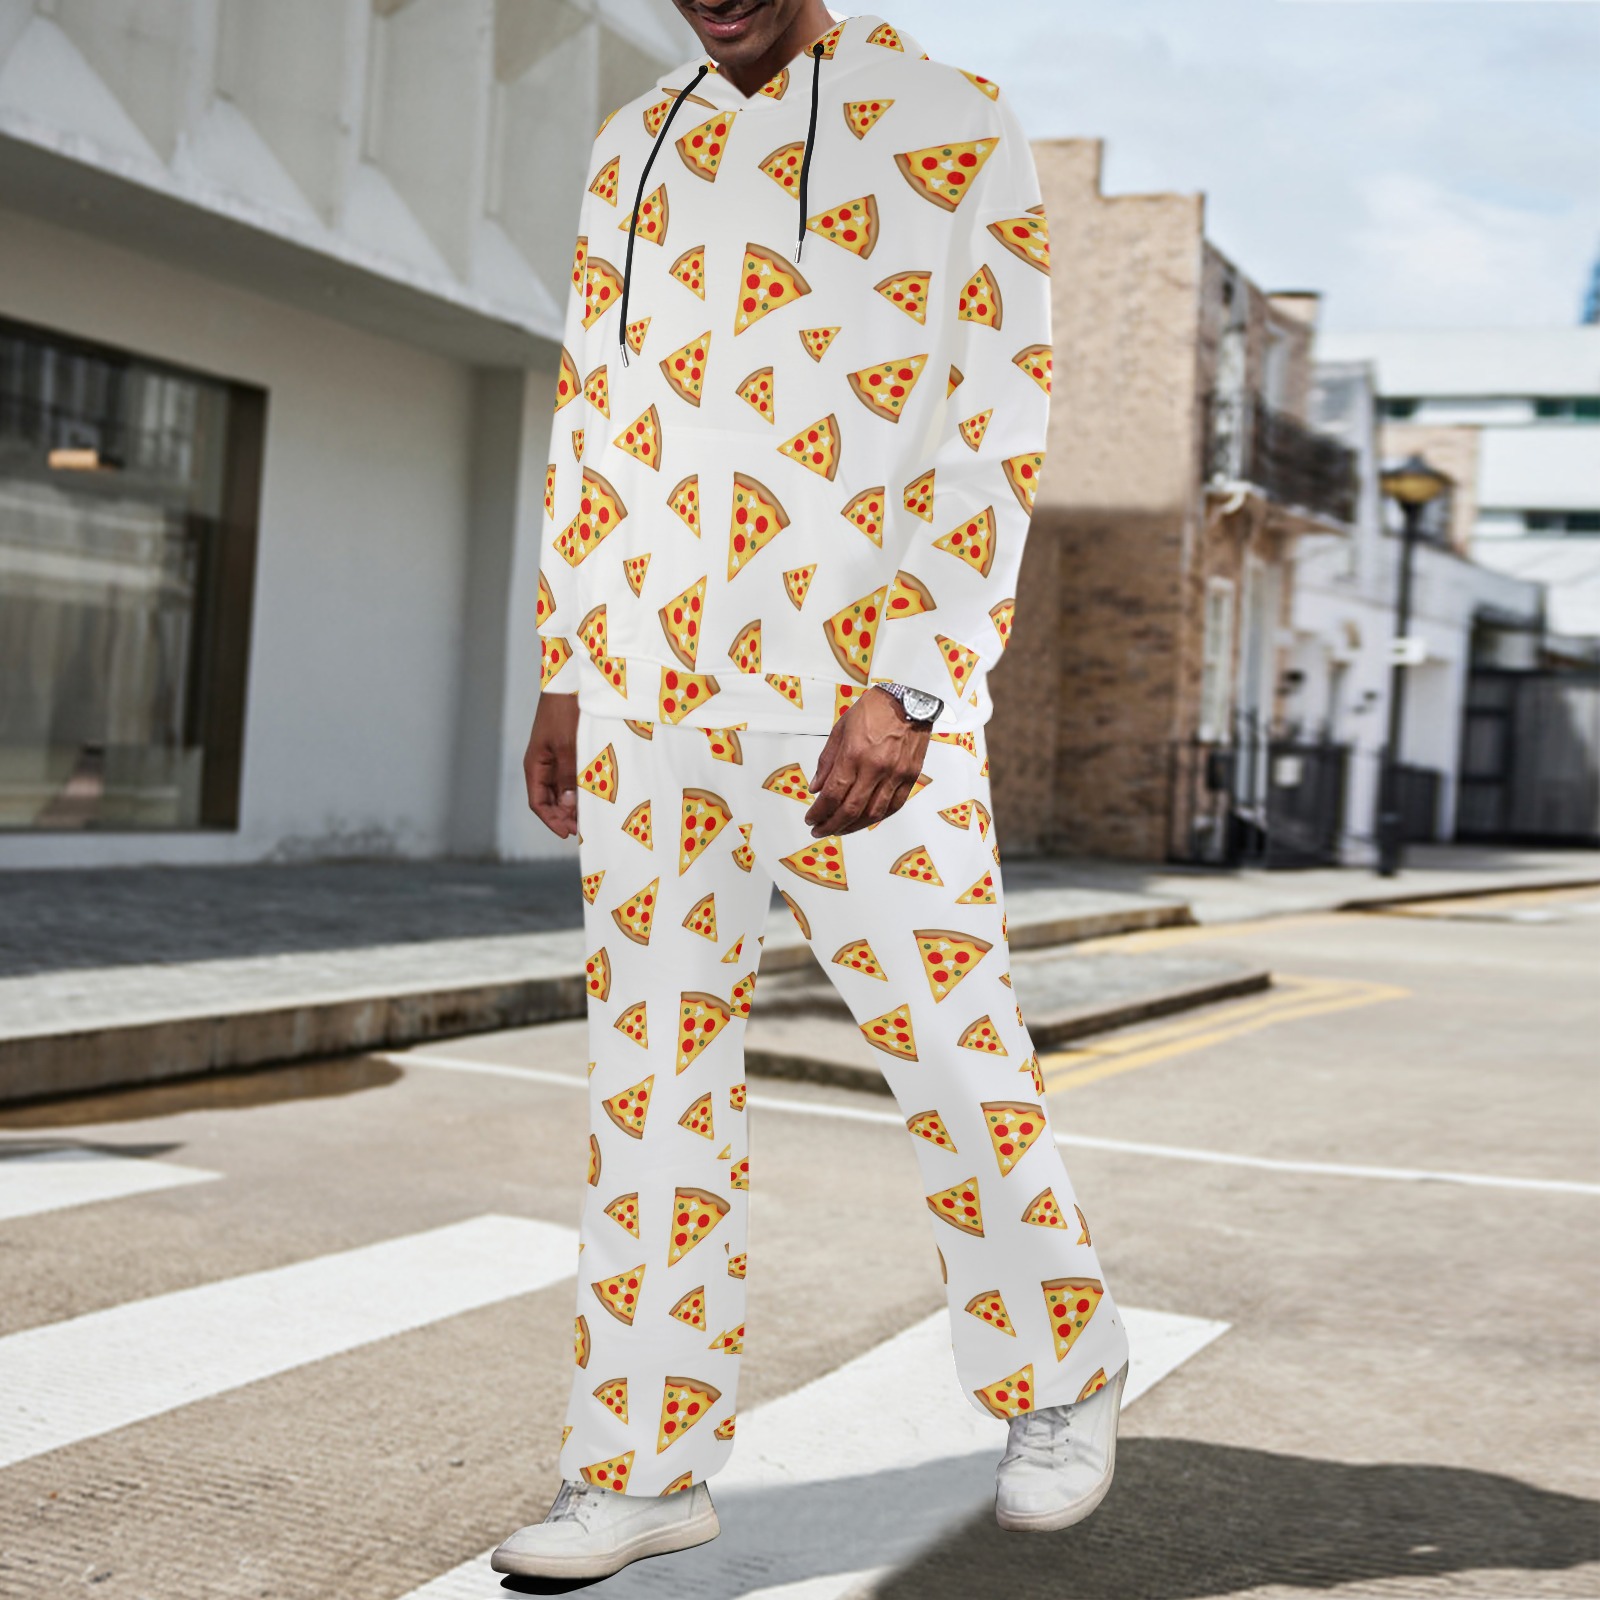 Cool and fun pizza slices pattern on white Men's Streetwear Flared Tracksuit (Set25)